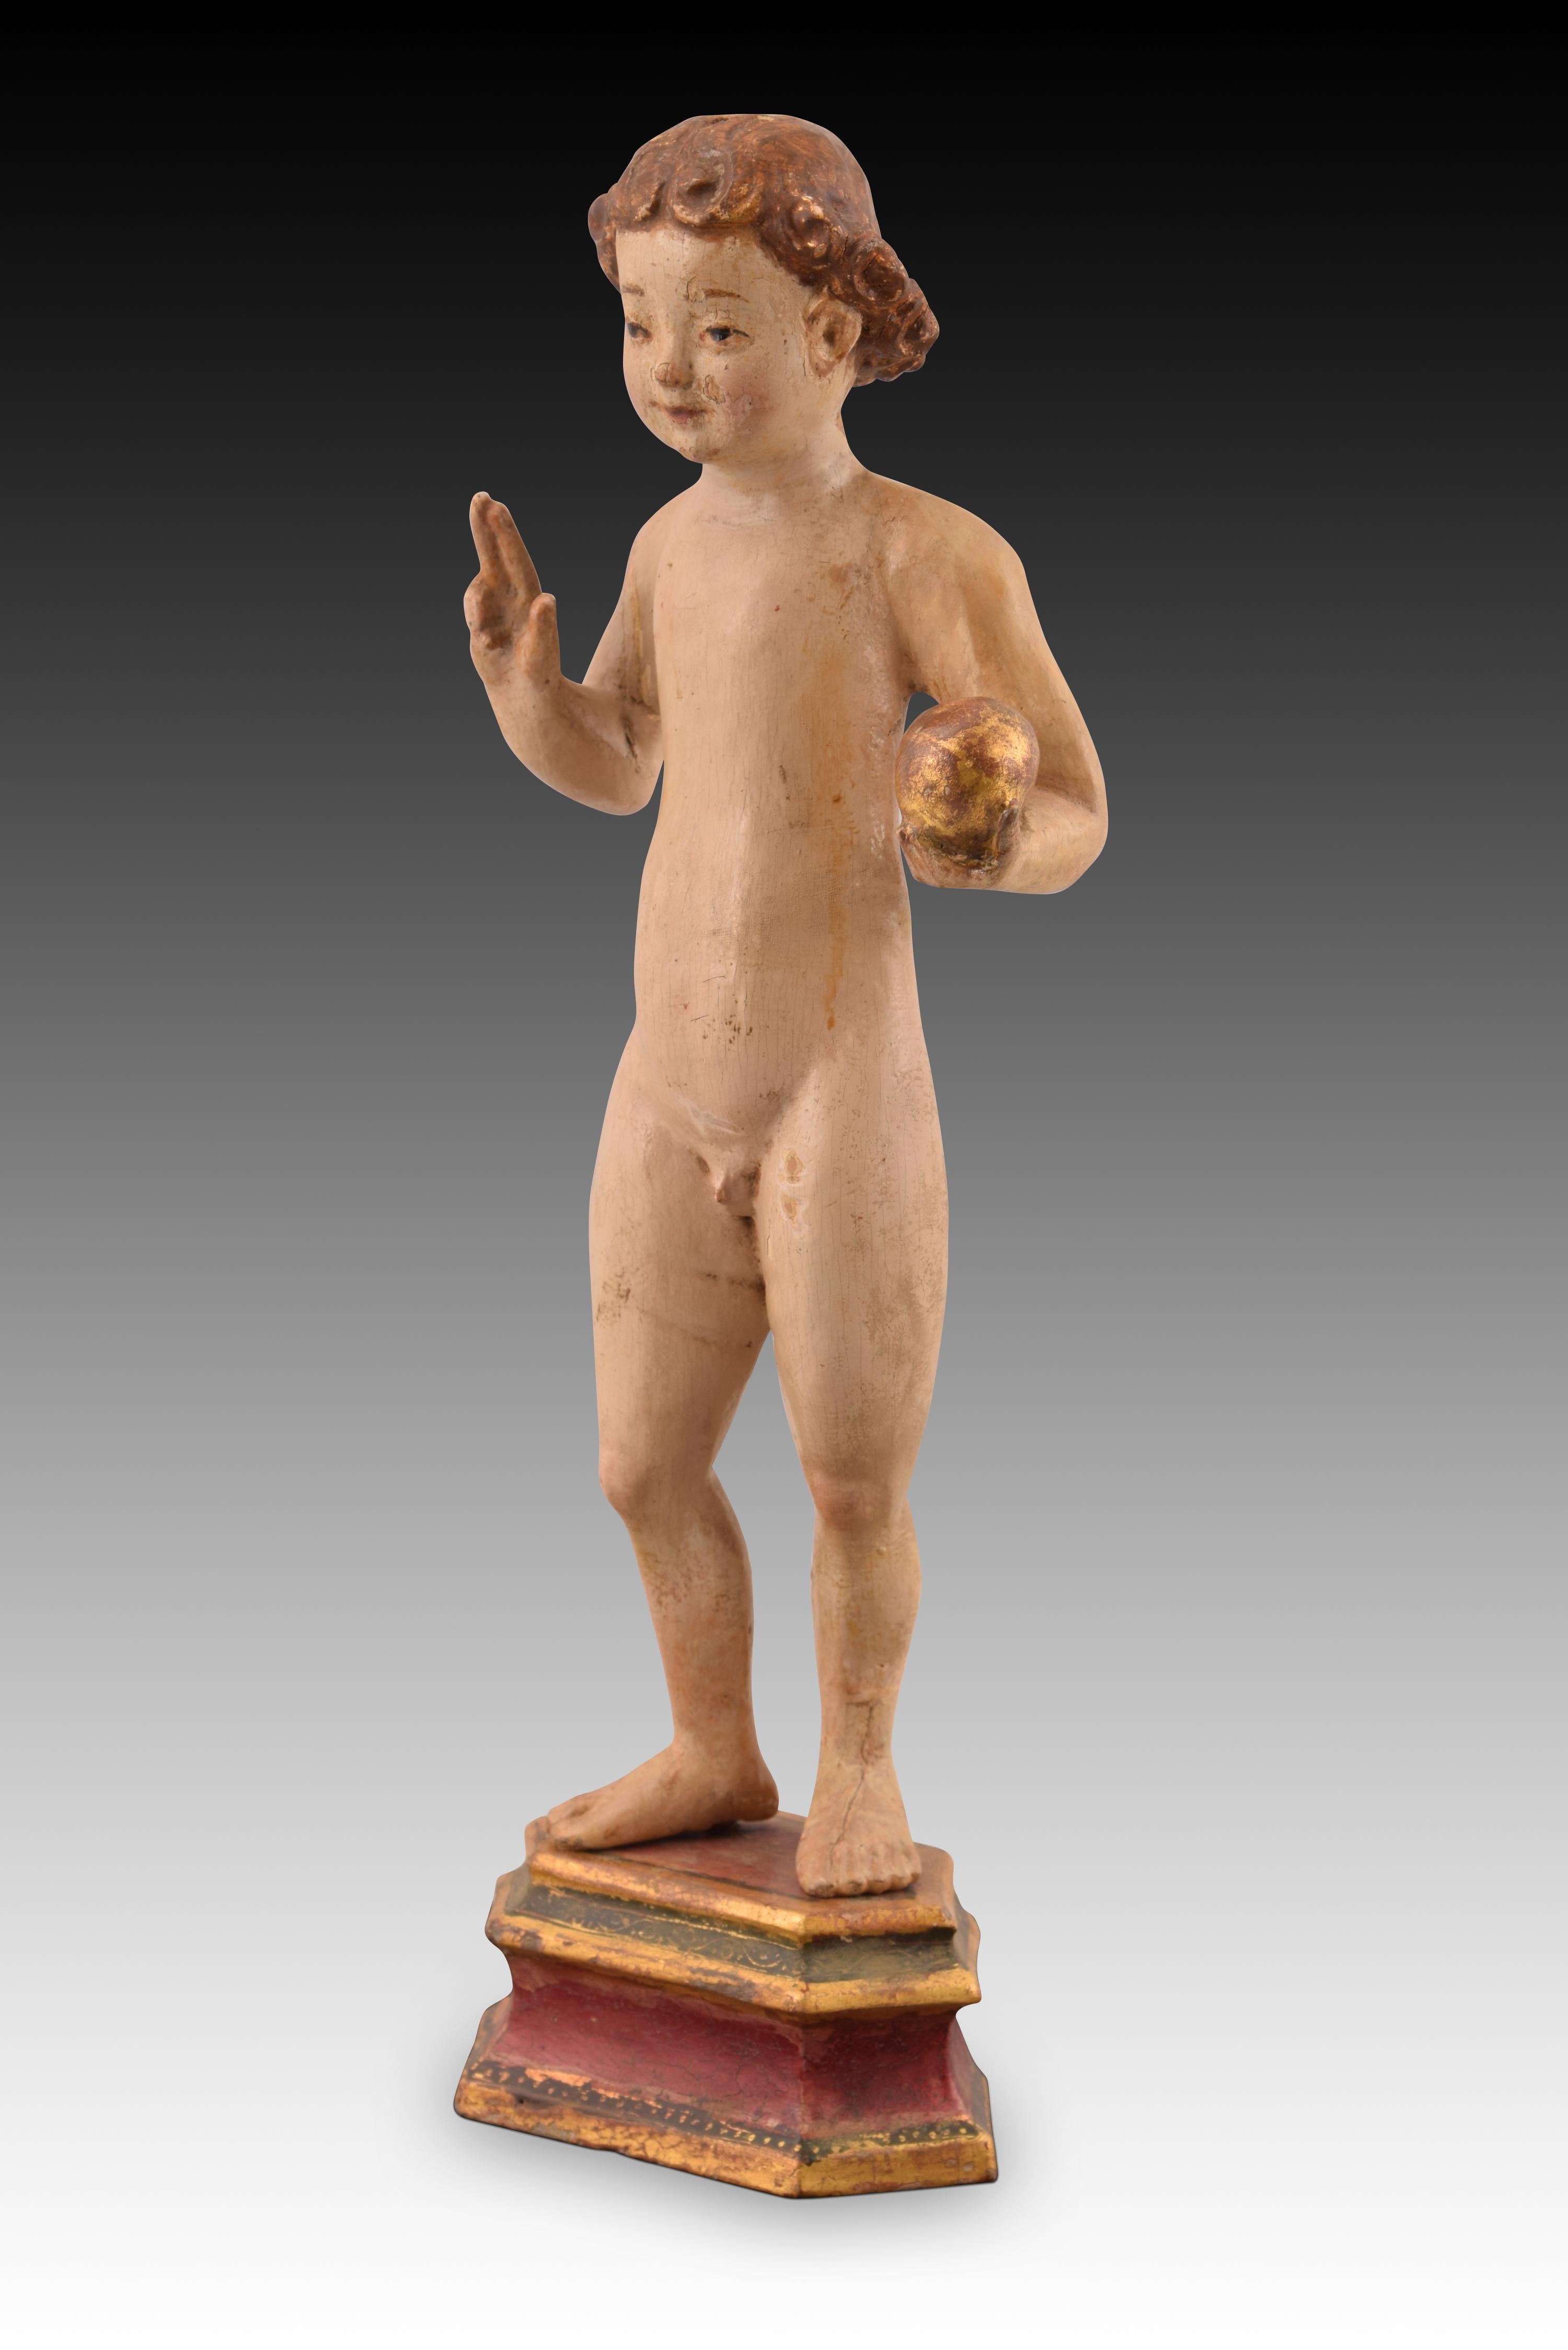 Child Jesus. Carved and polychrome wood. Flemish school, towards the first half of the 16th century.
 Restorations.
 Baby Jesus with polygonal base made of carved and polychrome wood. The figure is presented naked, standing, with the right hand